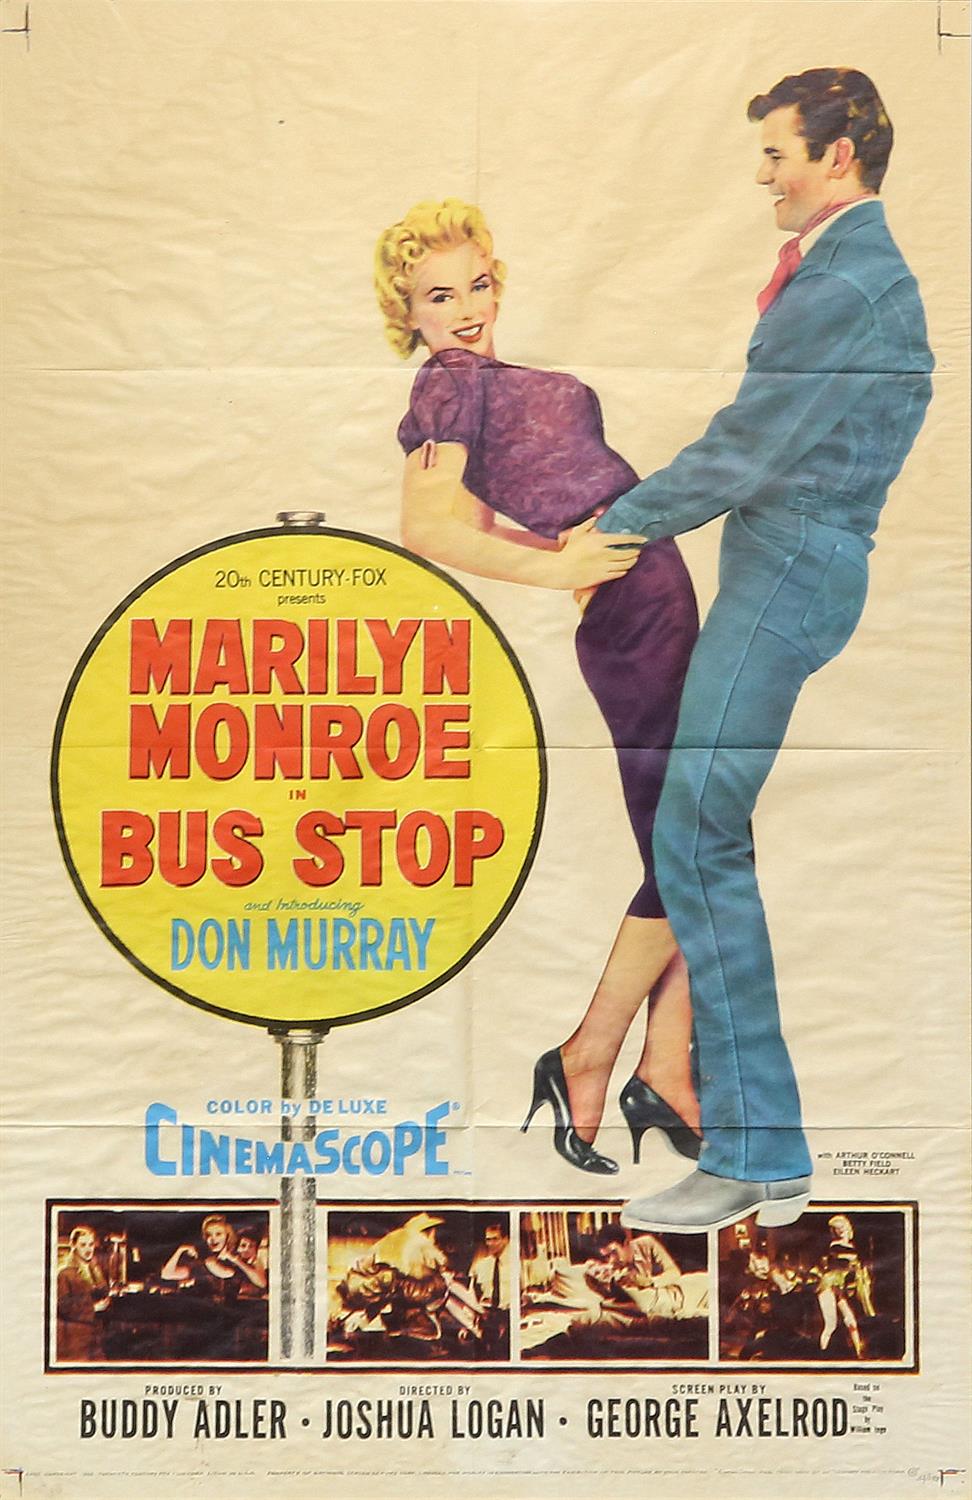 Bus Stop (1956) US One Sheet film poster, starring Marilyn Monroe, framed, 27 x 41 inches.